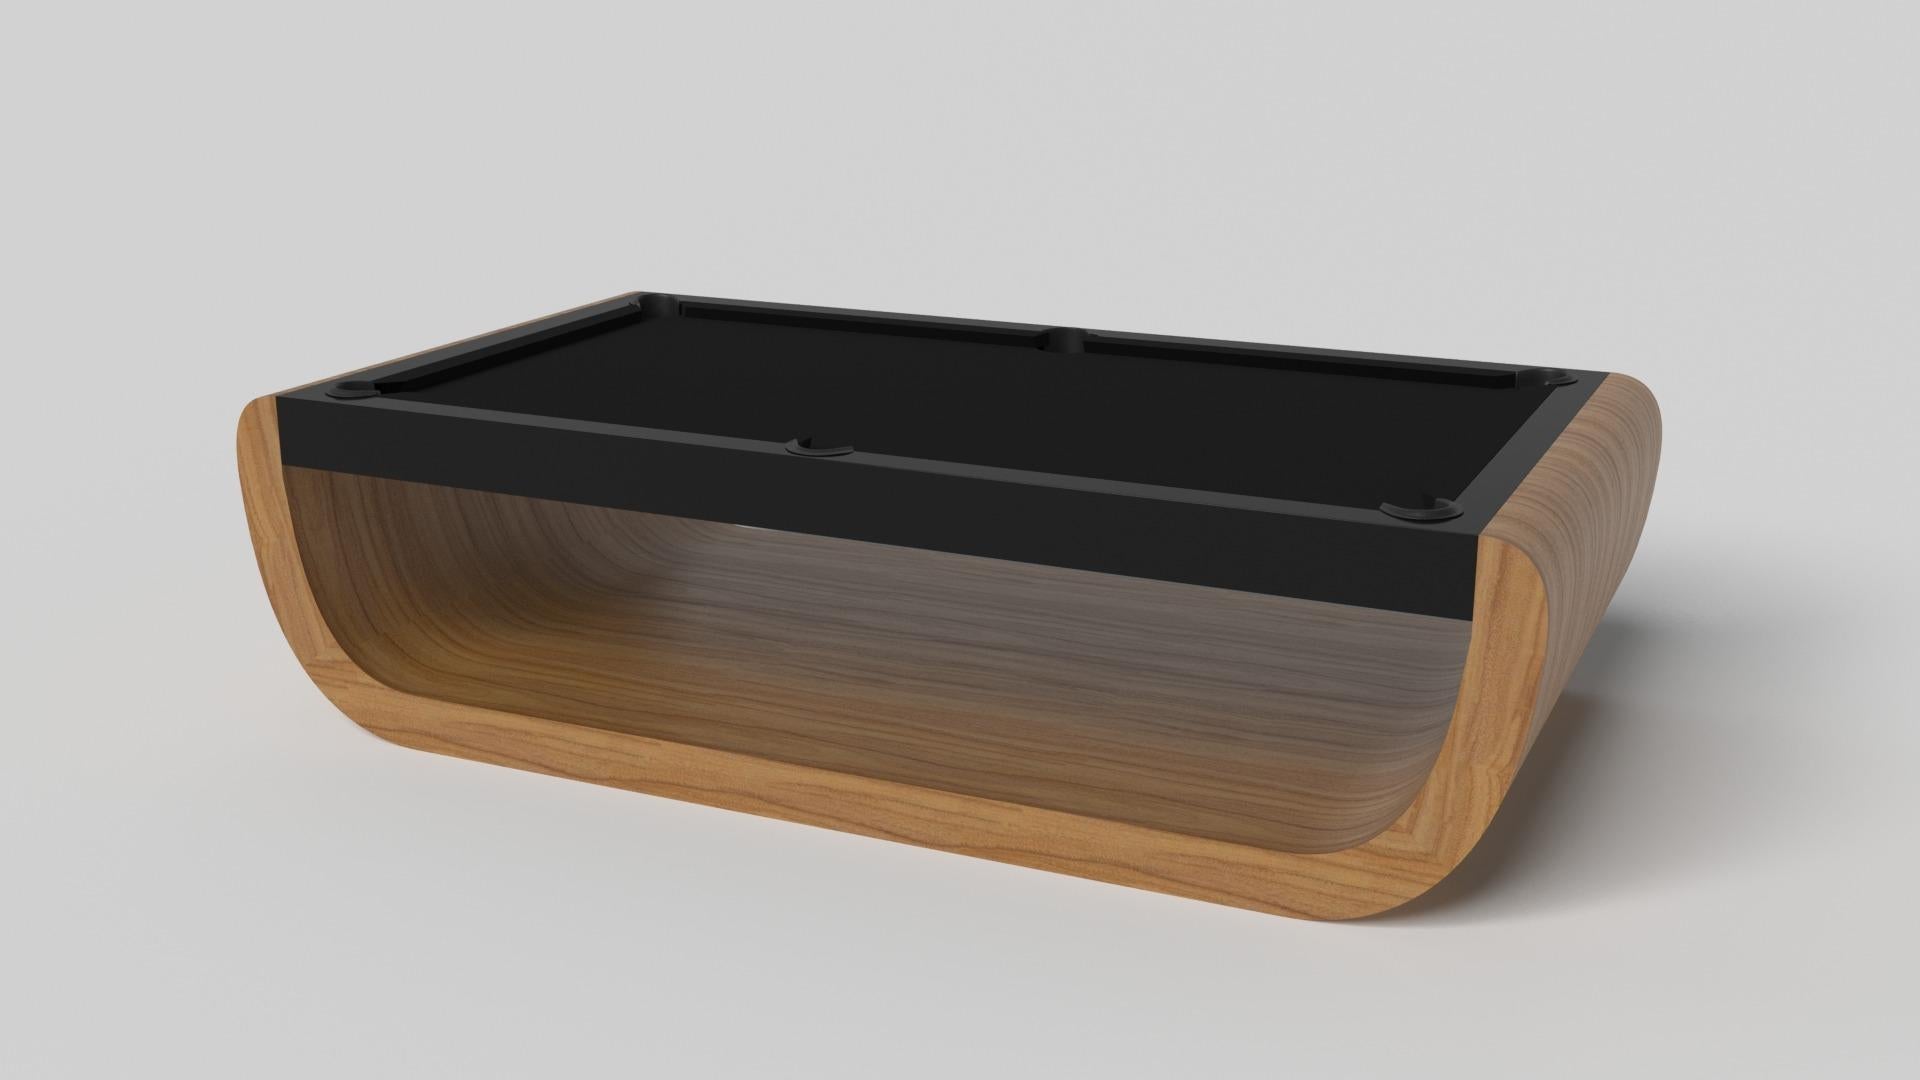 Handcrafted with intricate accents and a precision-carved curved base, the Sid pool table in black encompasses a series of smooth edges, distinctive details, and unconventional elements in one unique expression of luxury design. Built by hand from